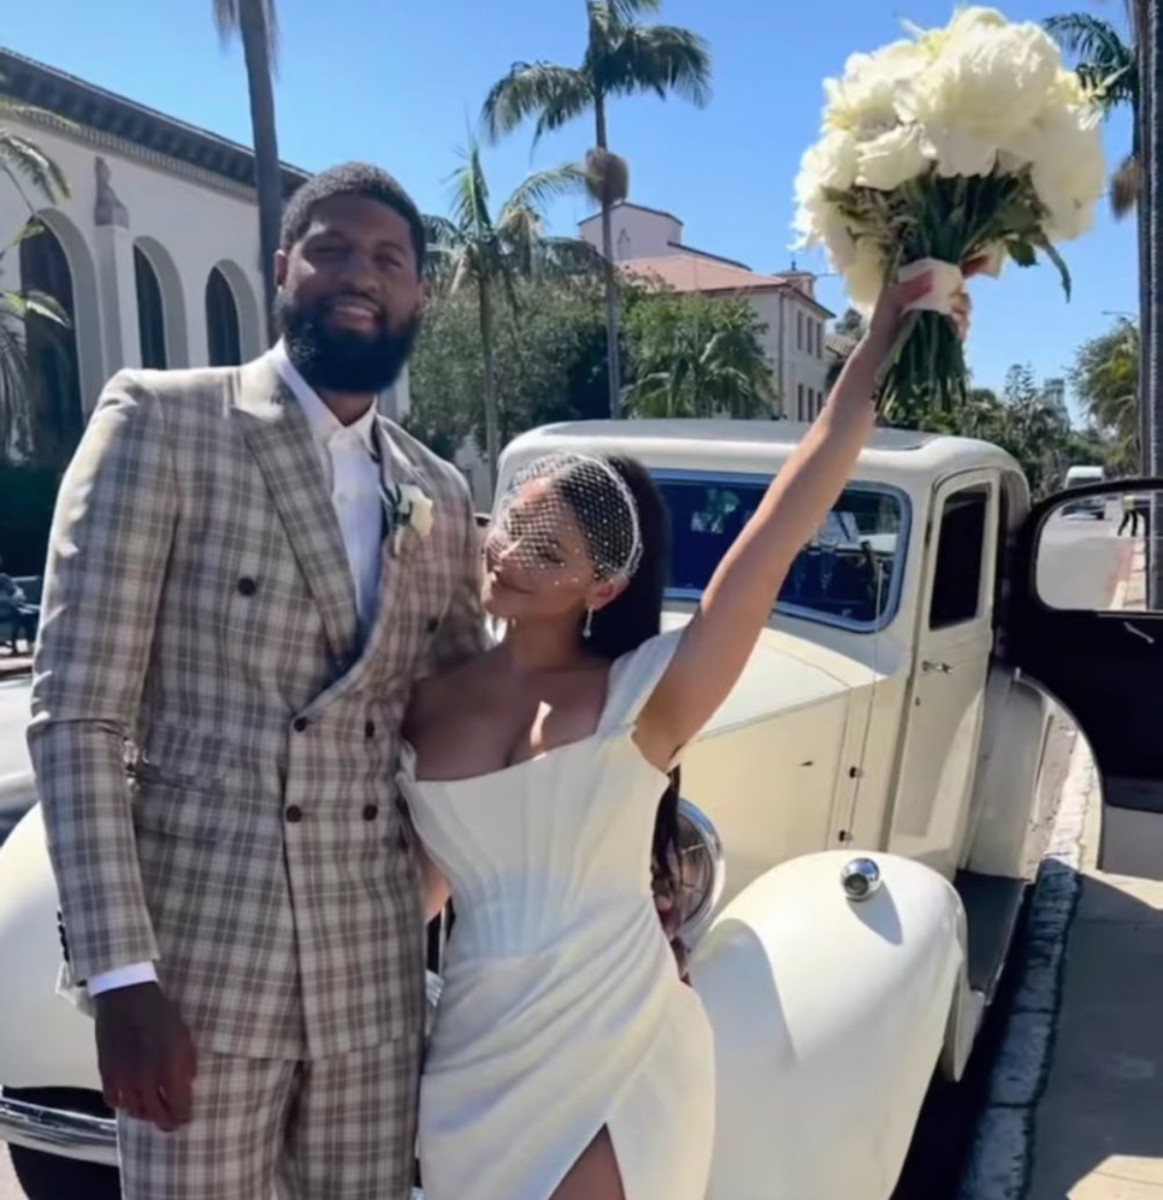 NBA Fans React After Paul George Marries Daniela Rajic: "Not The Only Ring He's Getting This Season."